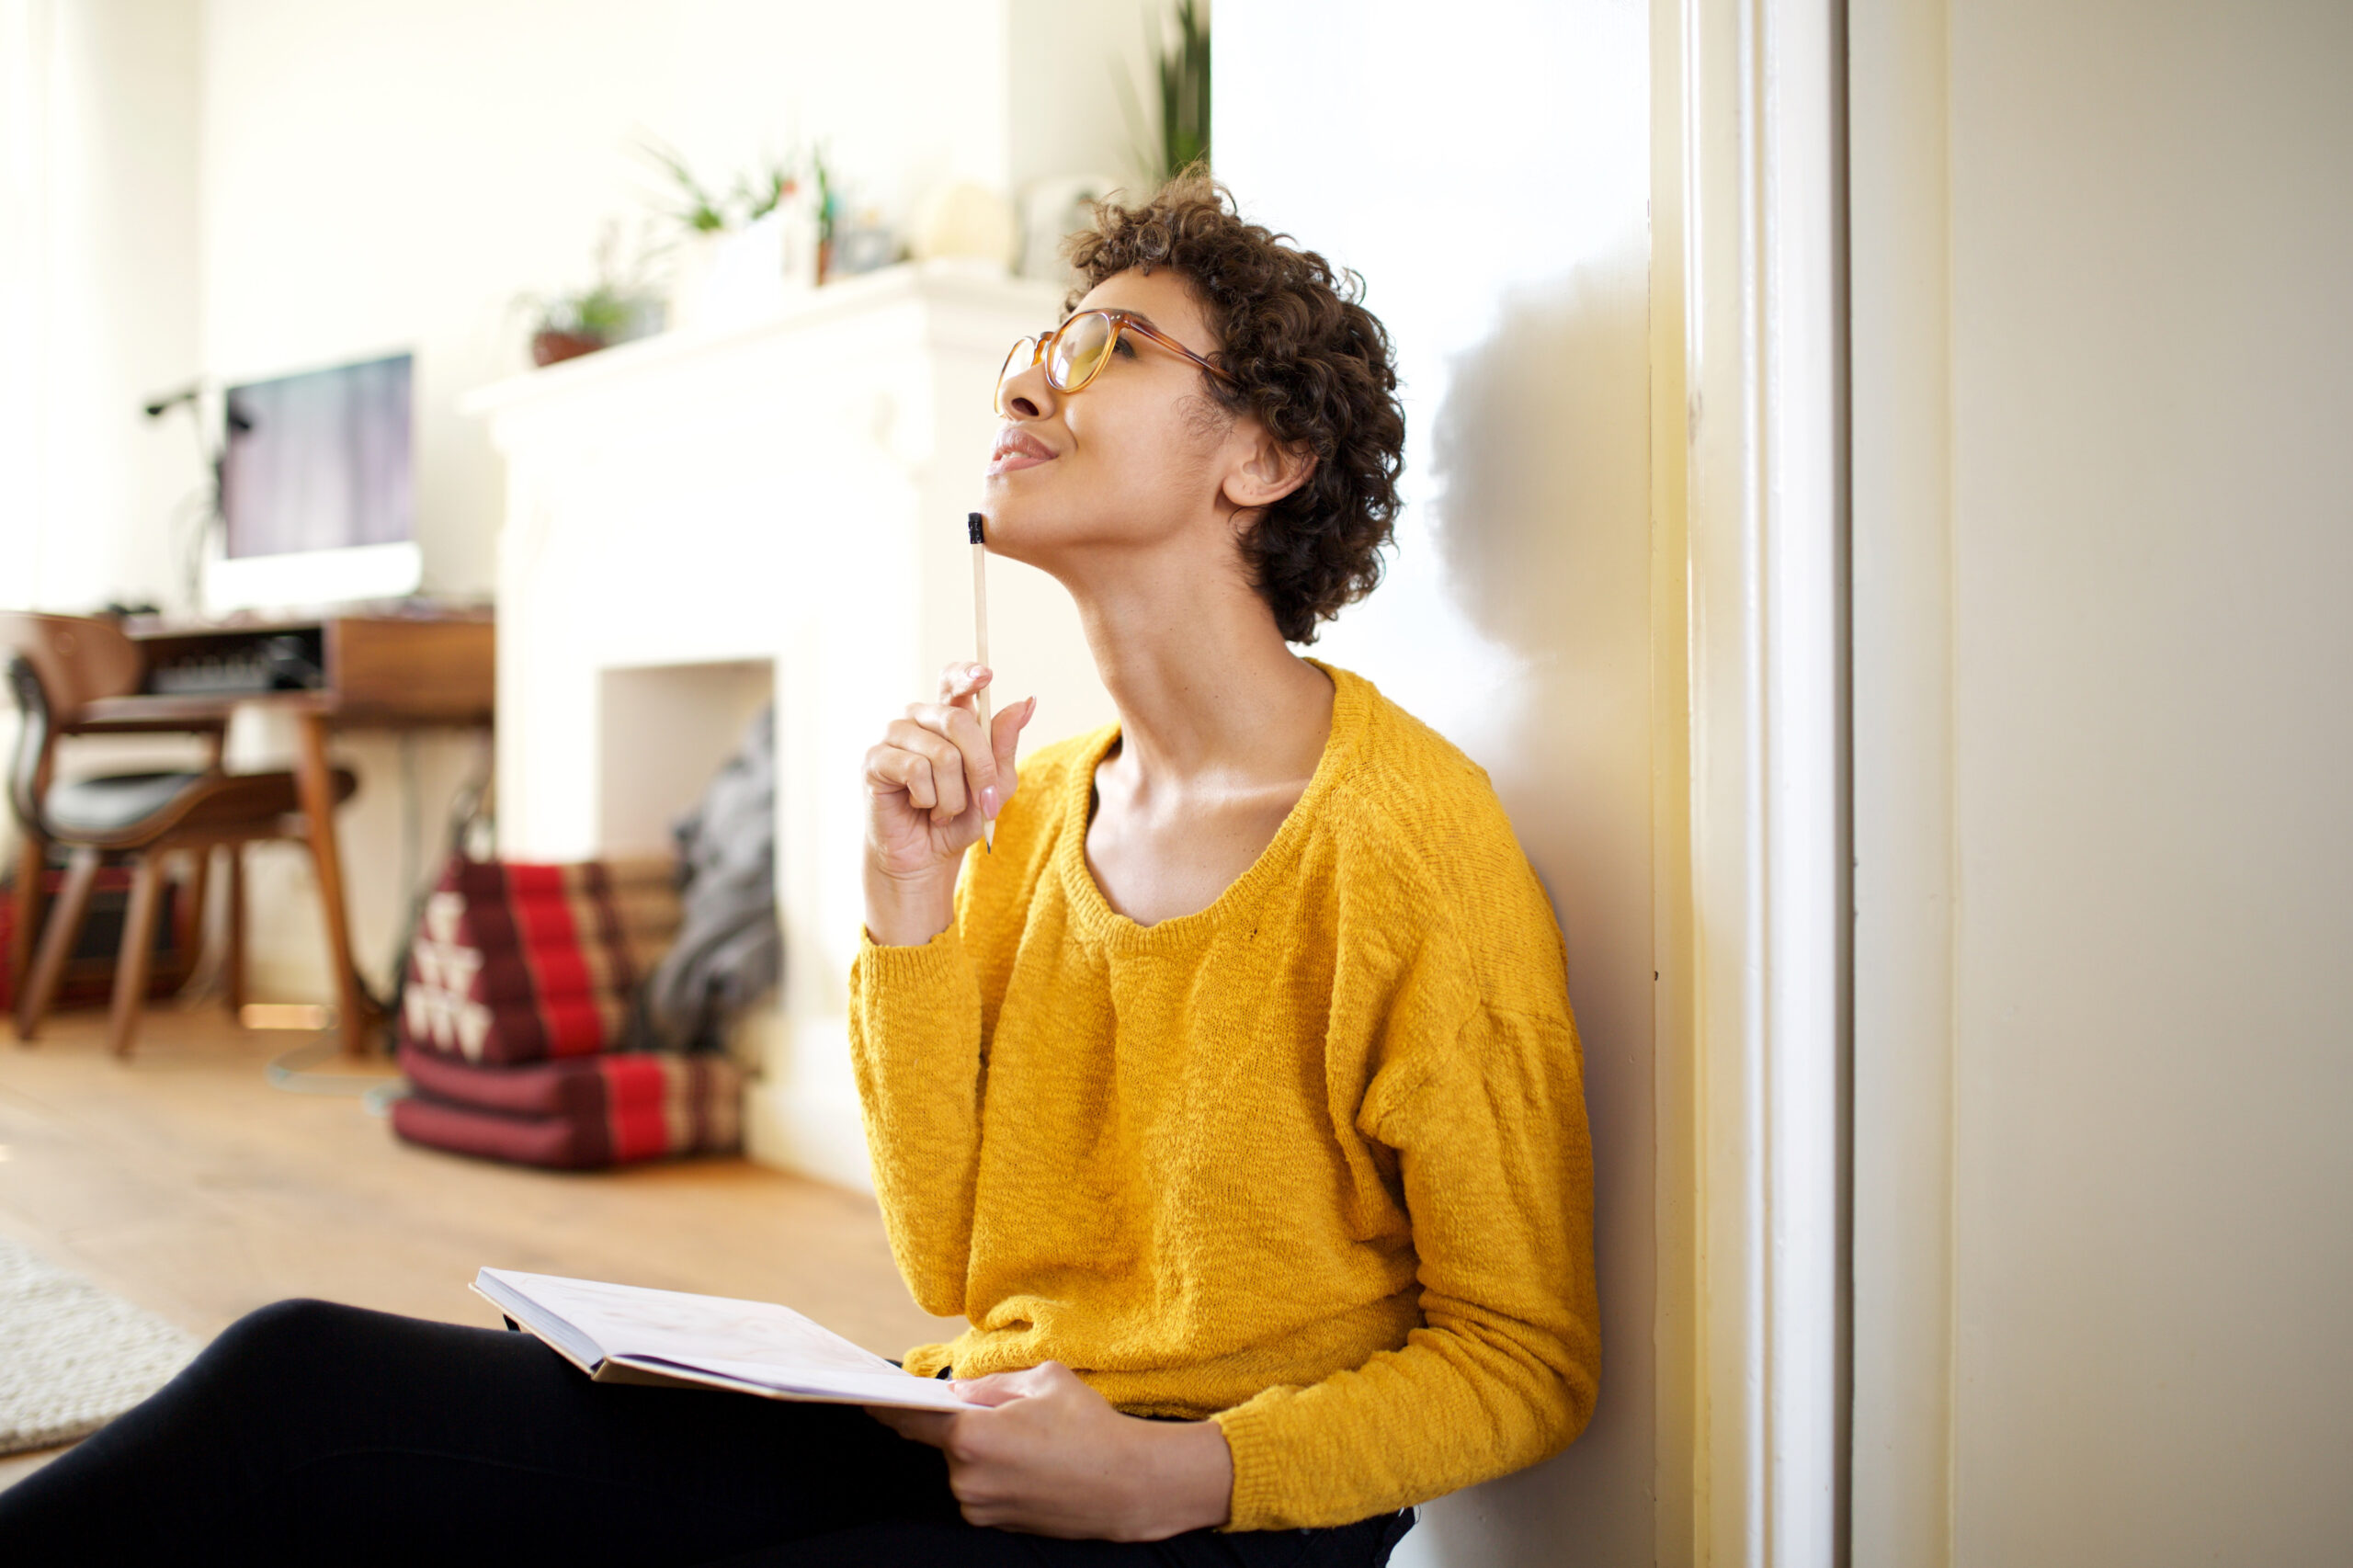 Photo of a woman with light brown skin, short, curly brown hair and glasses, wearing a yellow sweater and sitting in an inside doorway with a journal, holding a pen up to her chin in a pensive yet joyful pose.